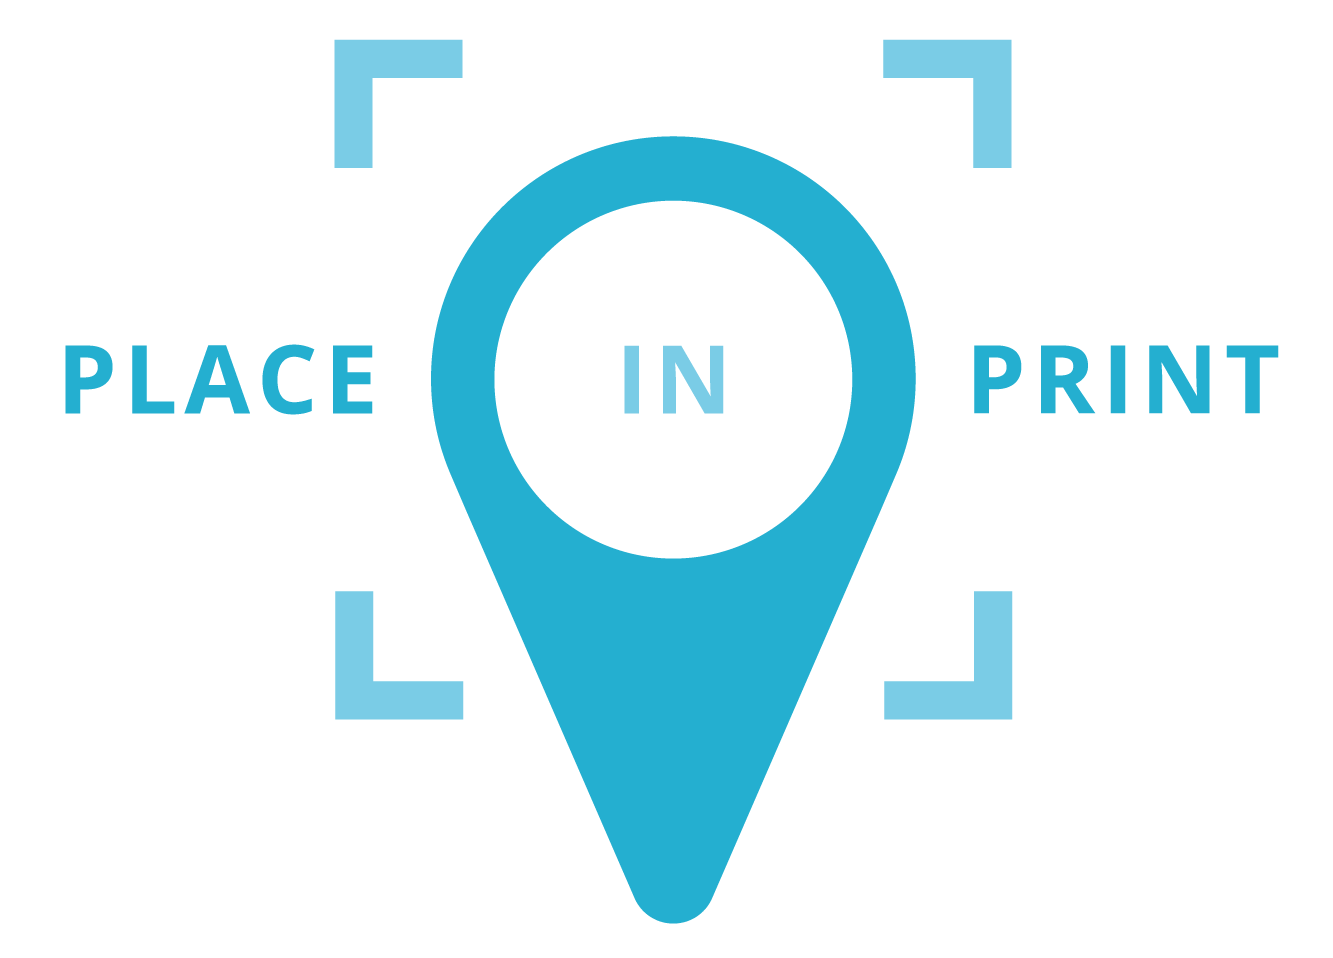 Place Clothing Logo - Dorking City Prints, Gifts, Homeware and Clothing | Place in Print